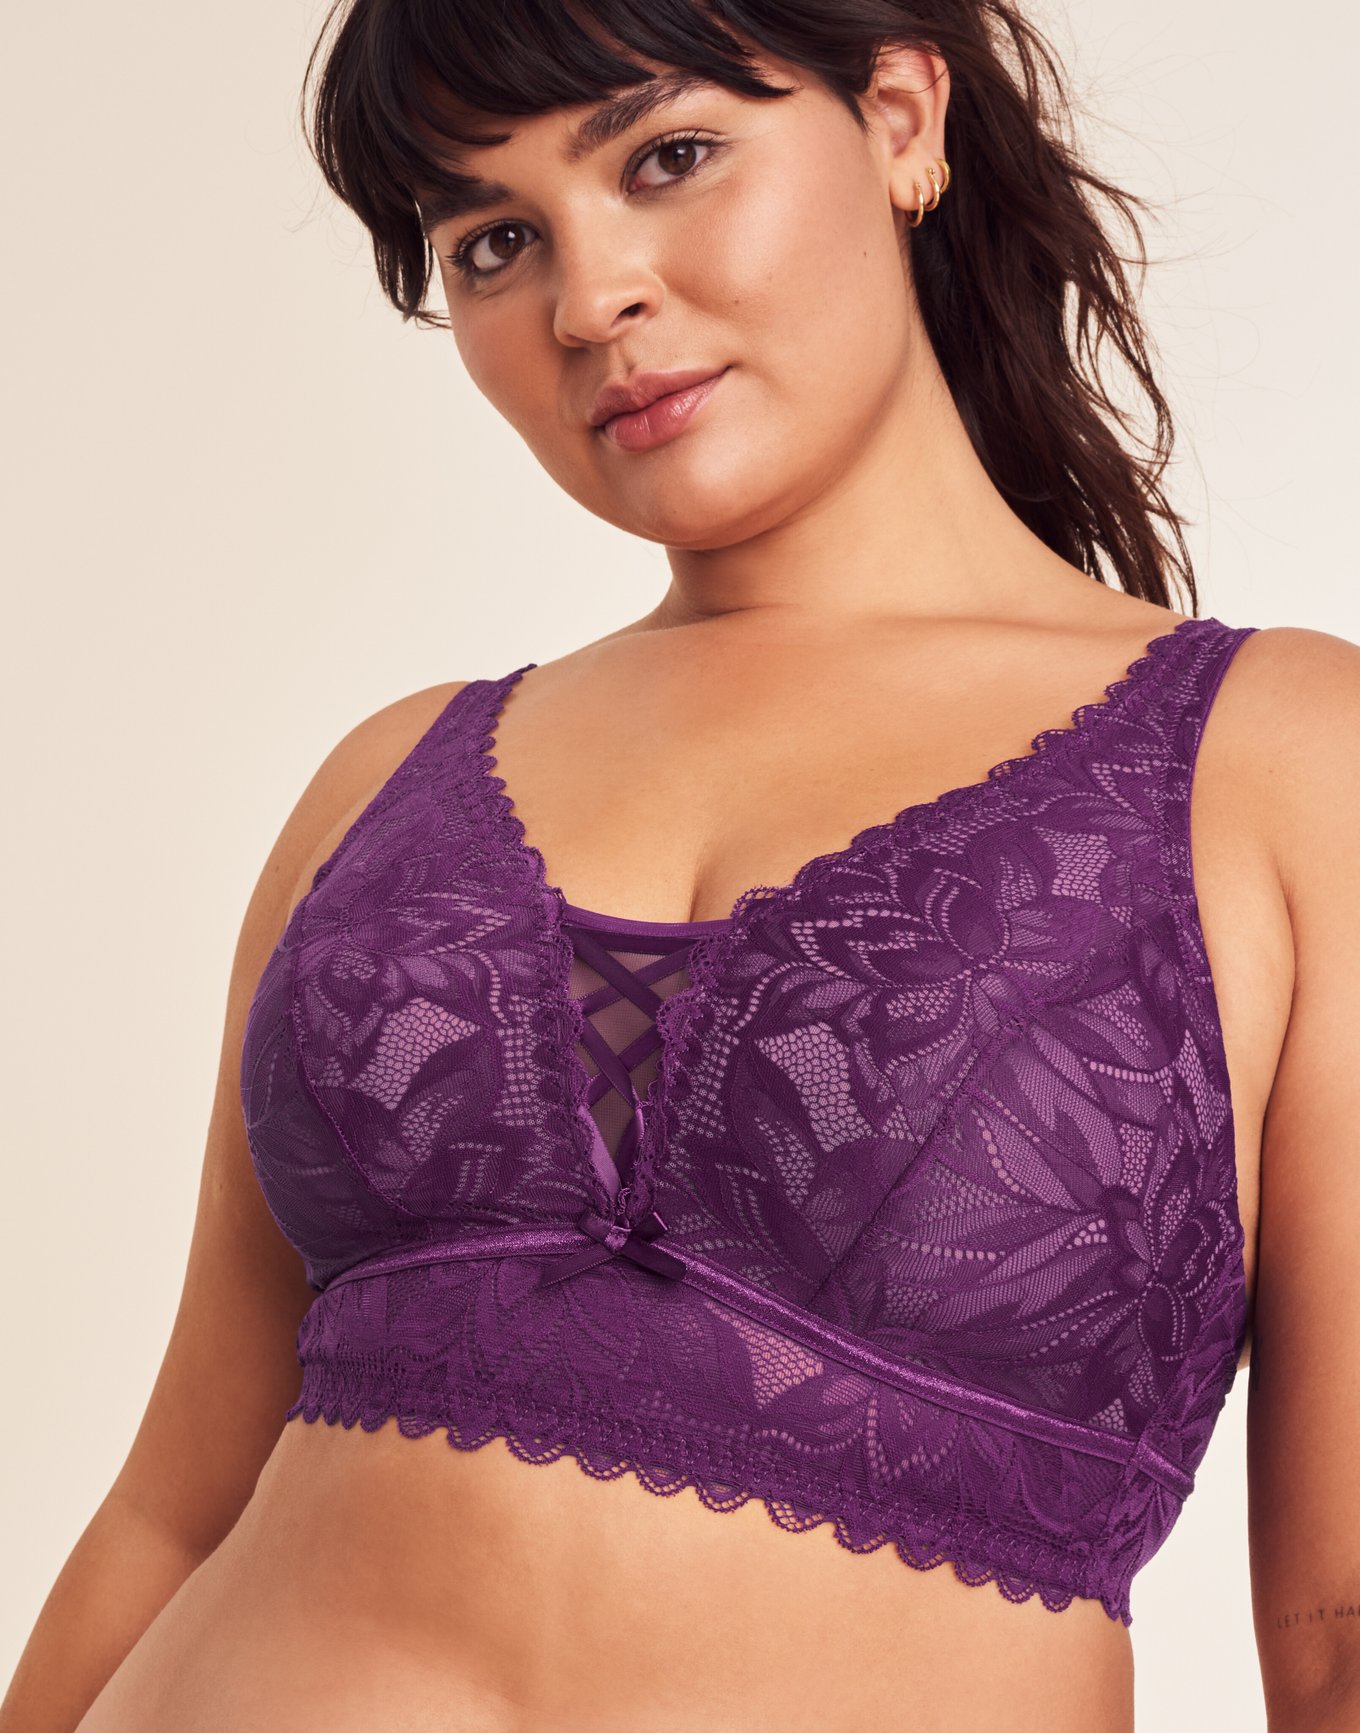 Auden Lace Bra 32A Purple Unlined Balconette Bralette Lingerie Intimates  Boho Size undefined - $15 New With Tags - From Alexis